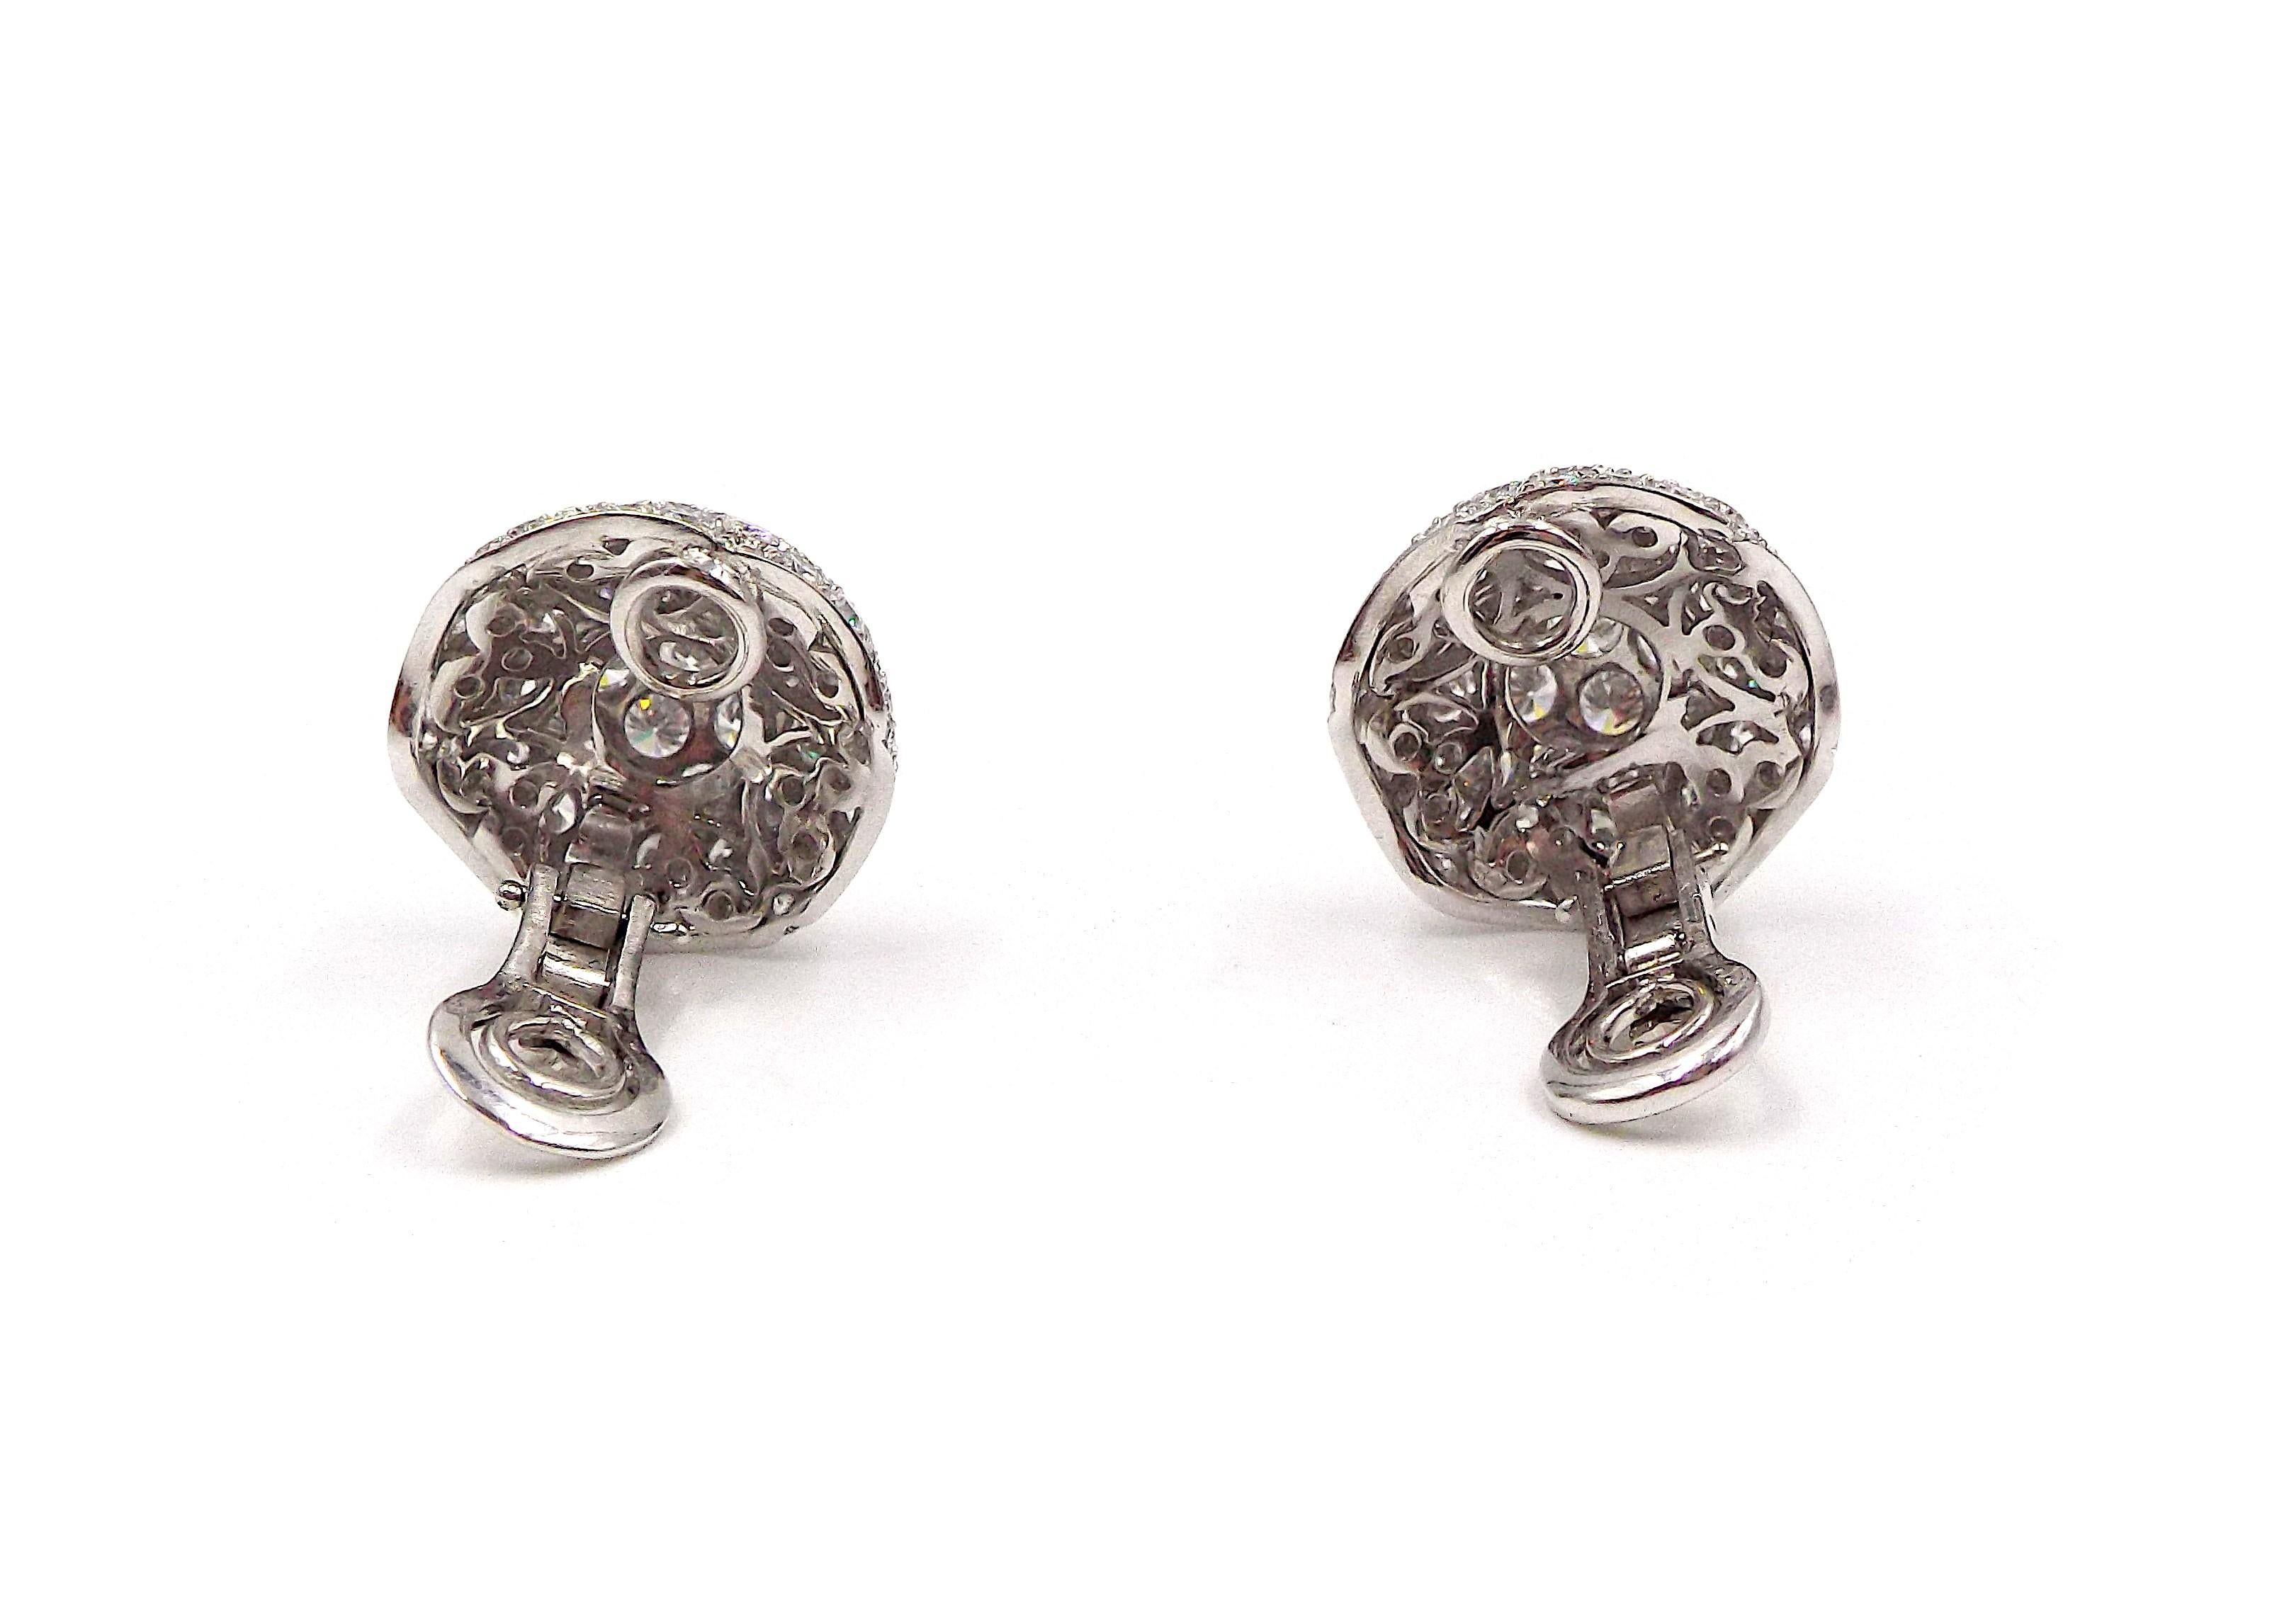 A pair of fancy white gold and diamond dome-shaped earrings by Graff. Weight is 15.5g, diamond weight is approximately 12ct. Earrings are approximately 2cm in diameter.